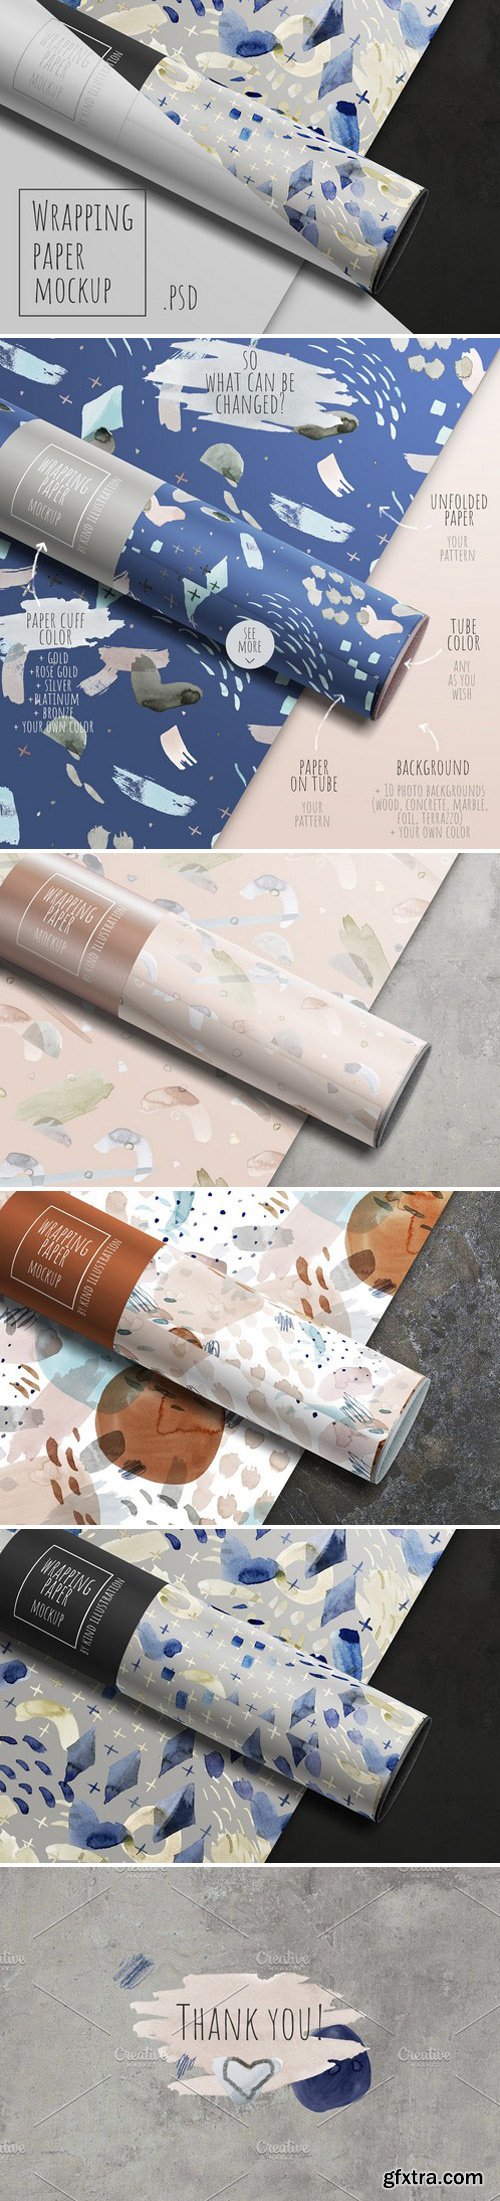 CM - Wrapping paper mockup 2340406